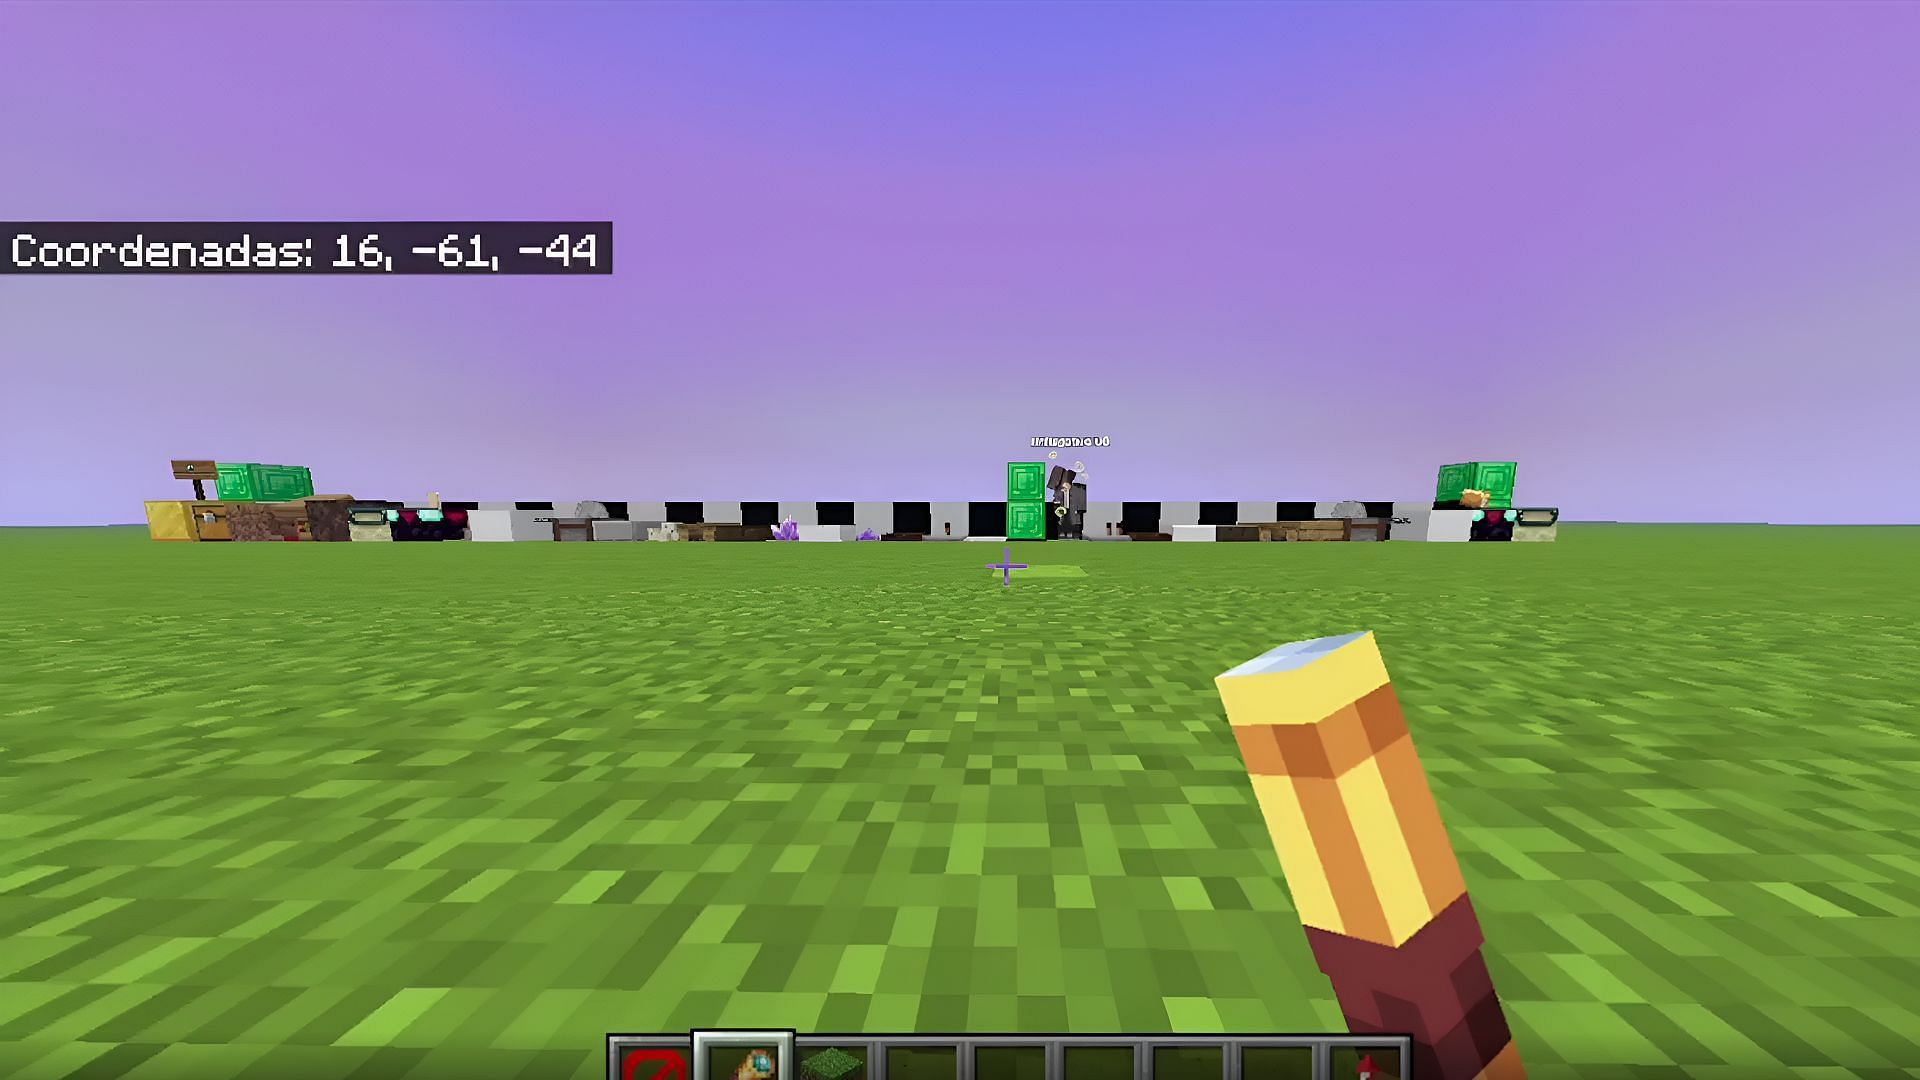 Two Minecraft players could have just created the longest single stair in the game.